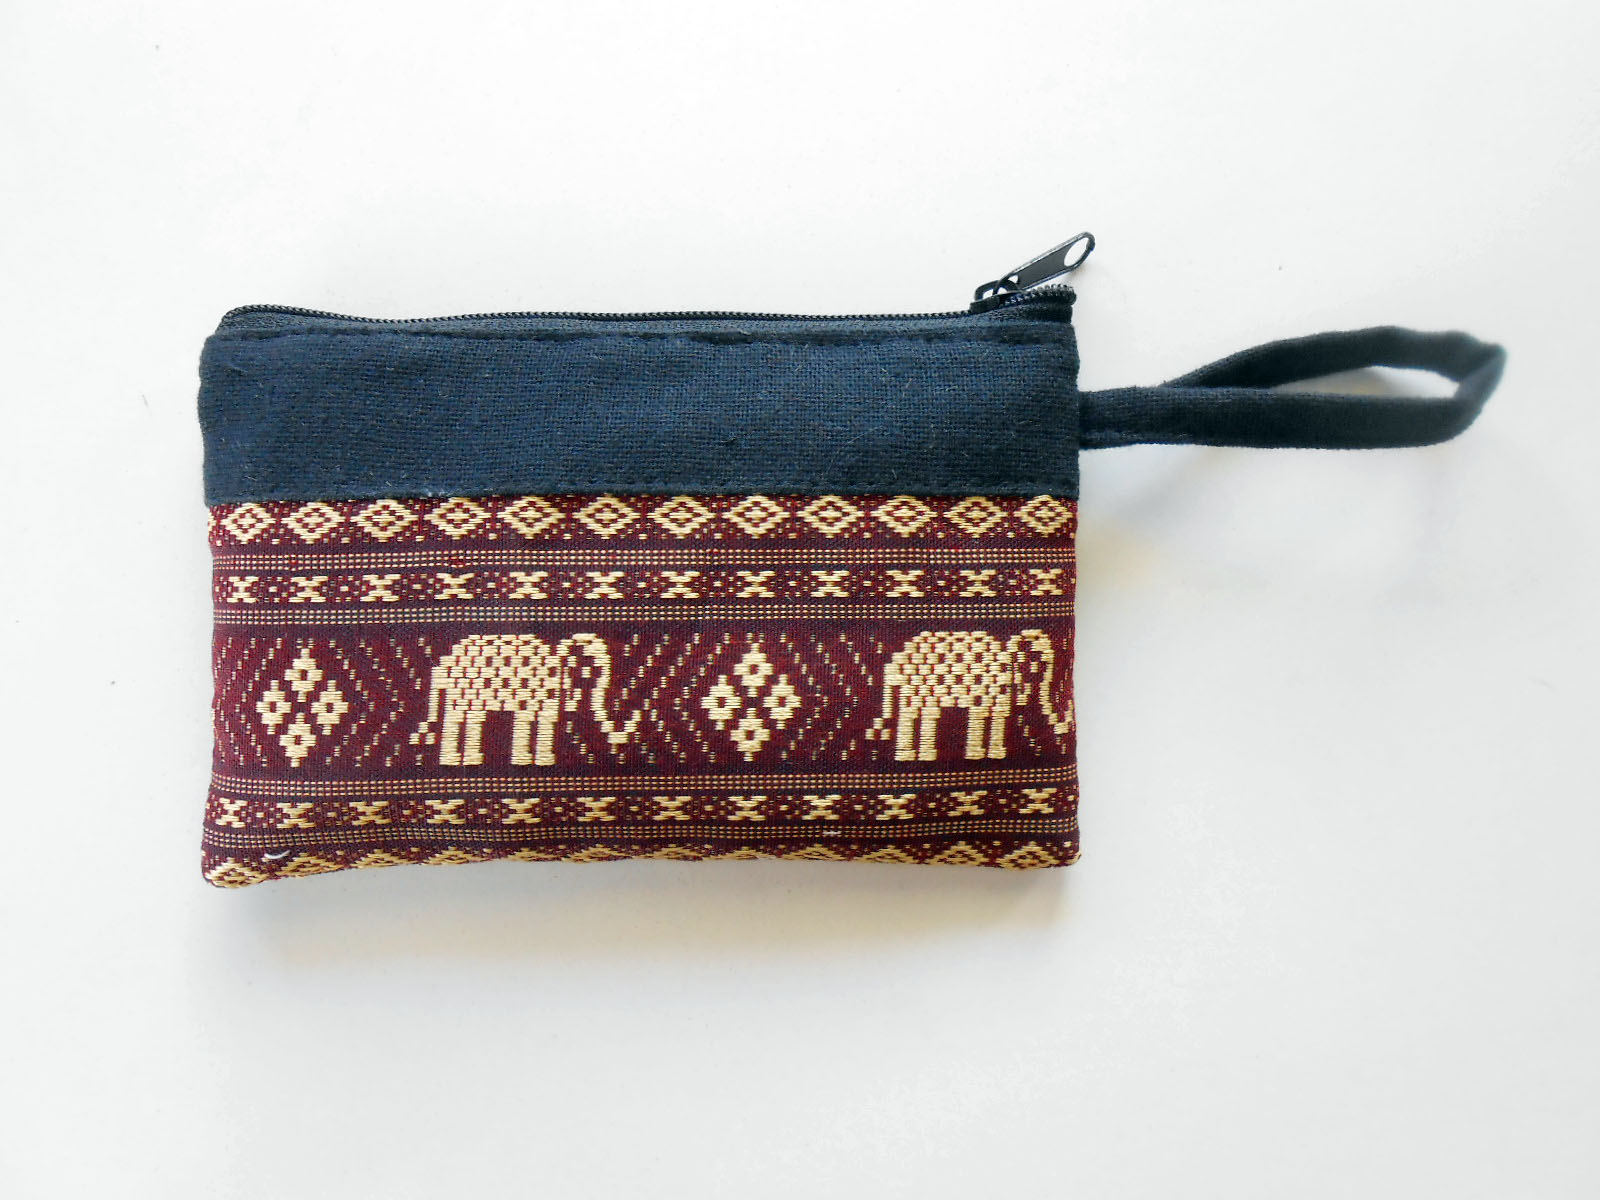 Zipper Coin Pouch Change Purse - Elephant - Small Bag, Embroidery ...